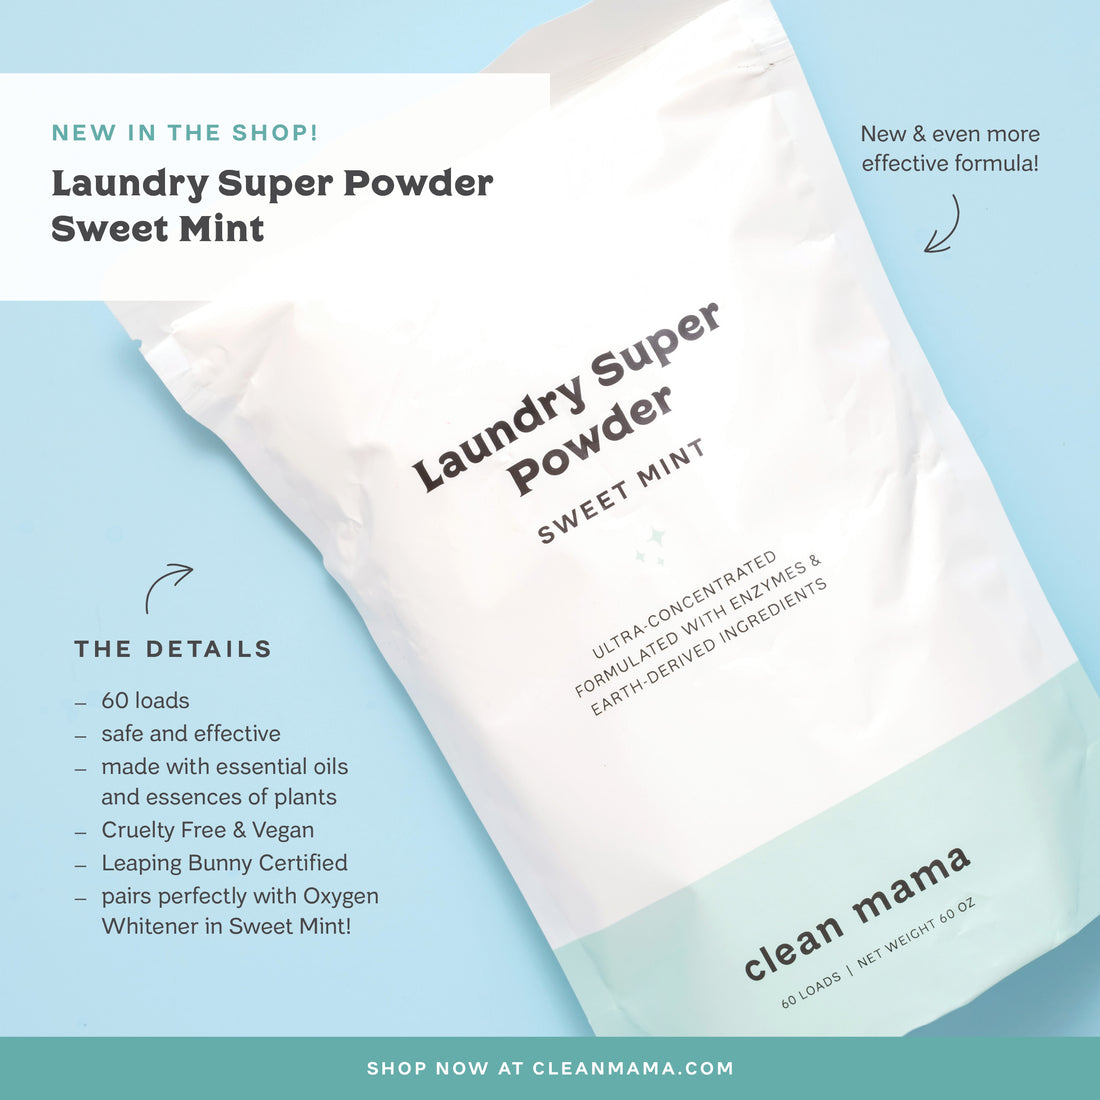 New in the Shop : Laundry Super Powder Available in Sweet Mint